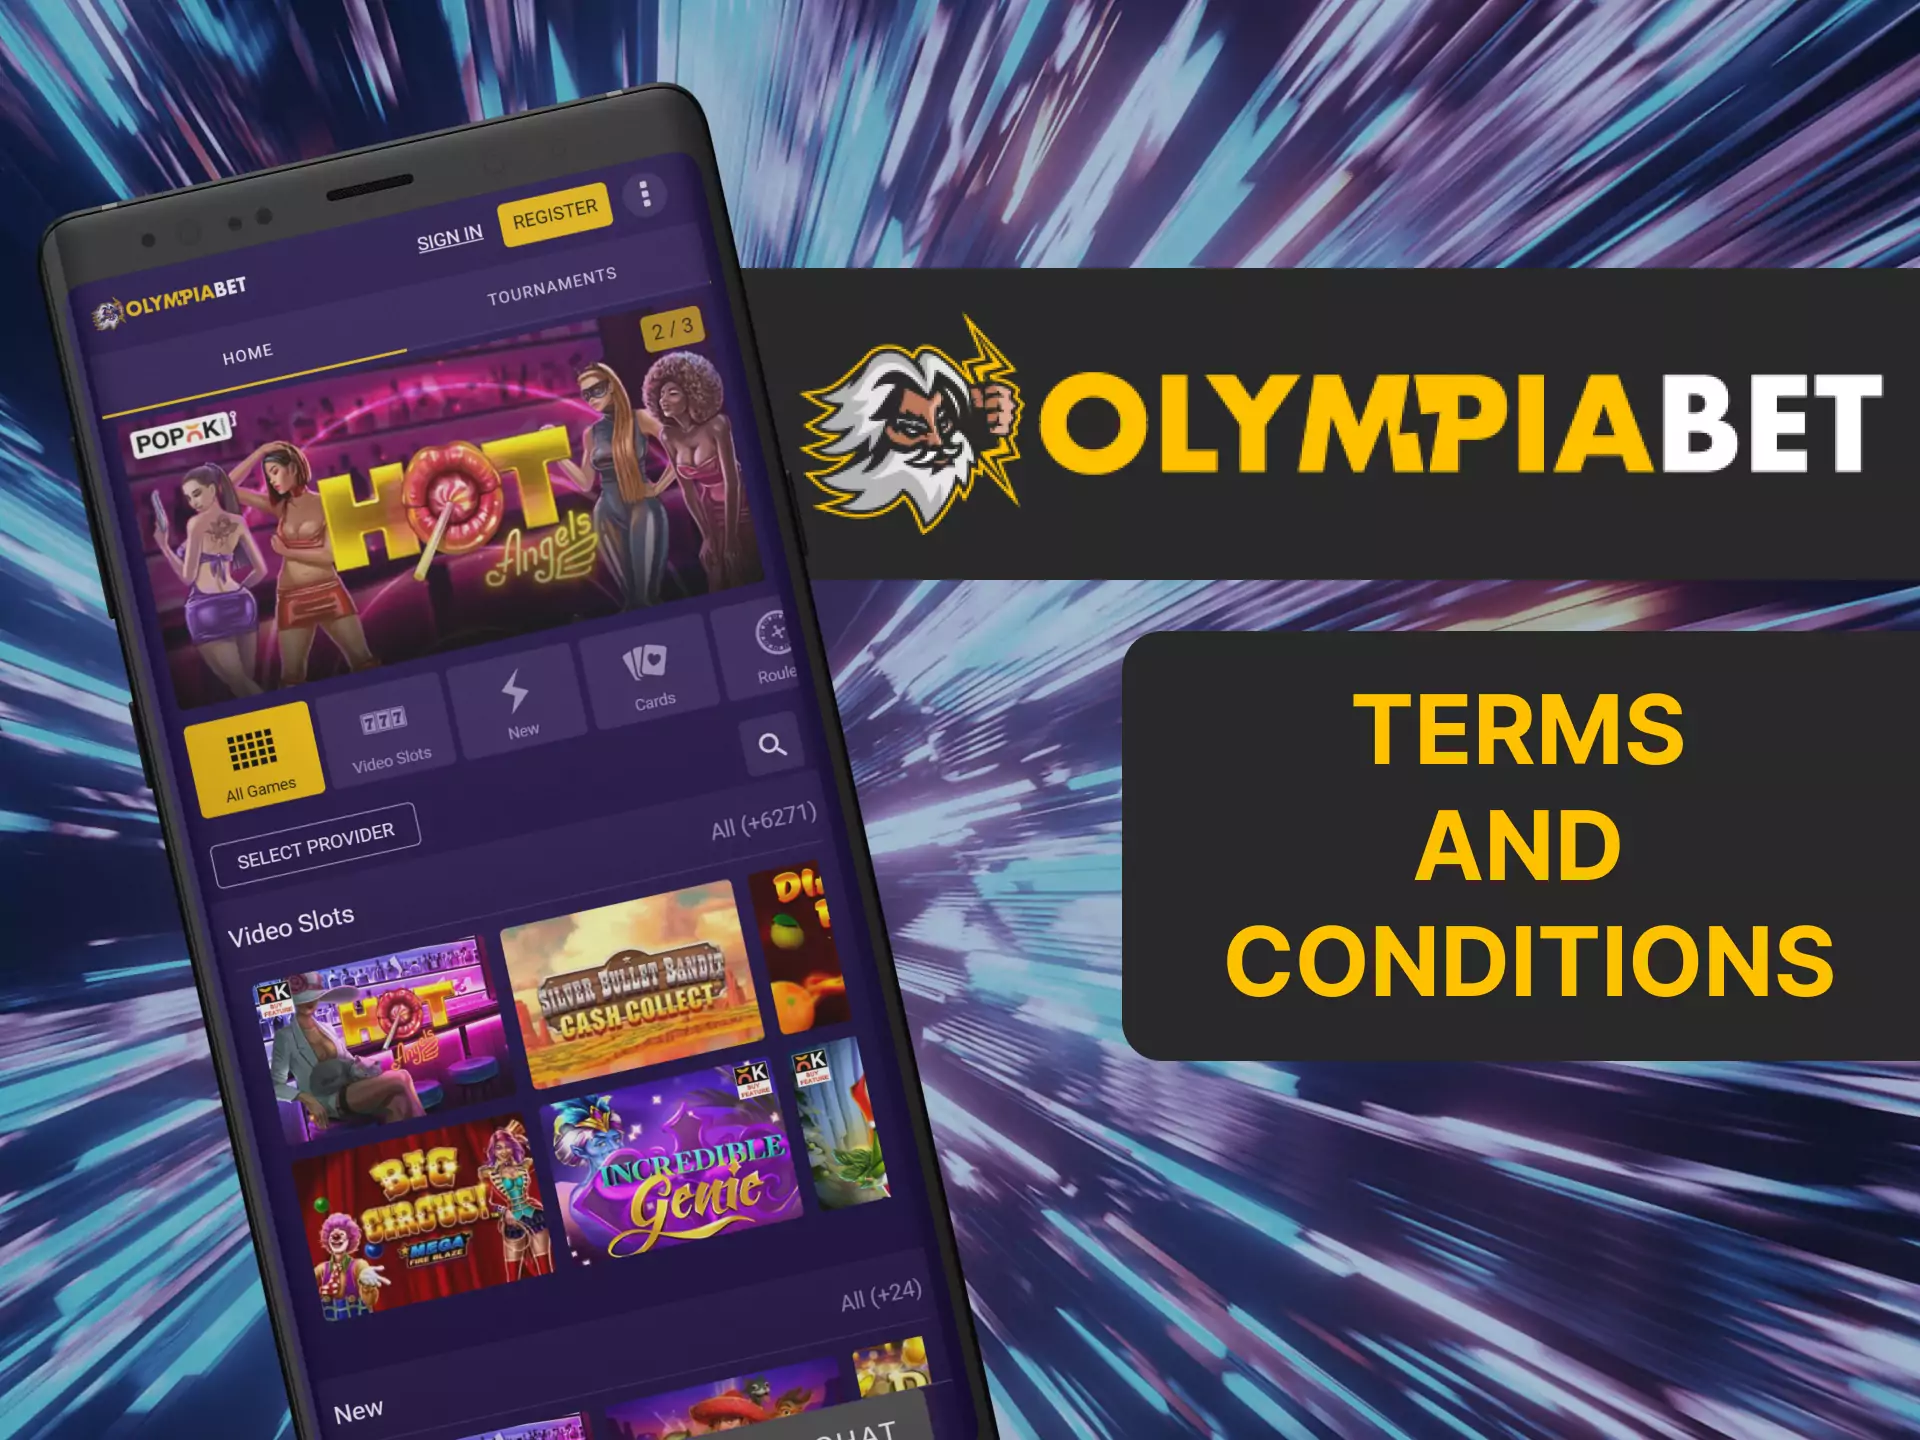 Check out the terms and conditions of Olympiabet.